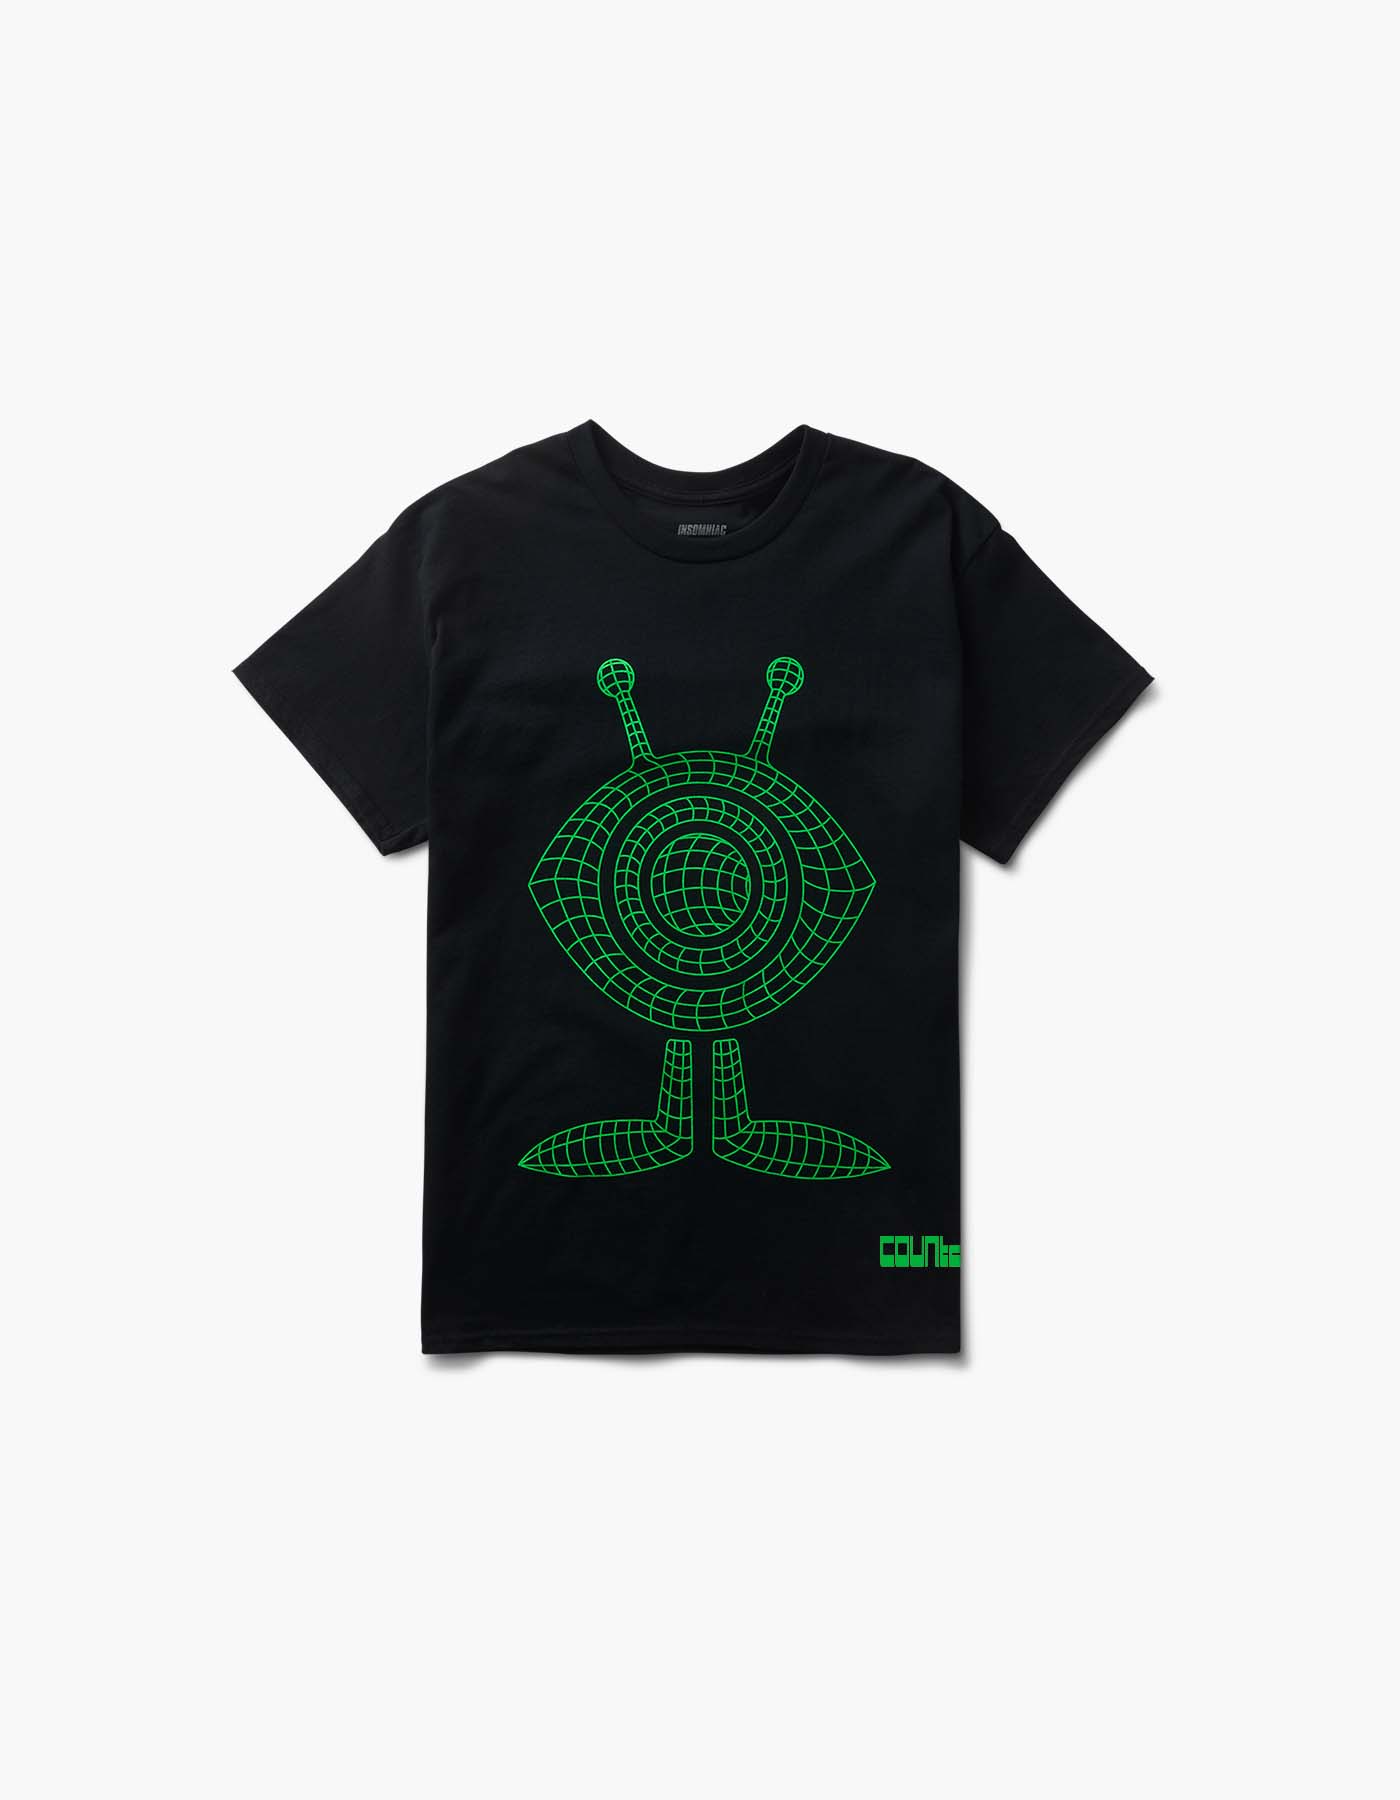 Abducted S/S Tee